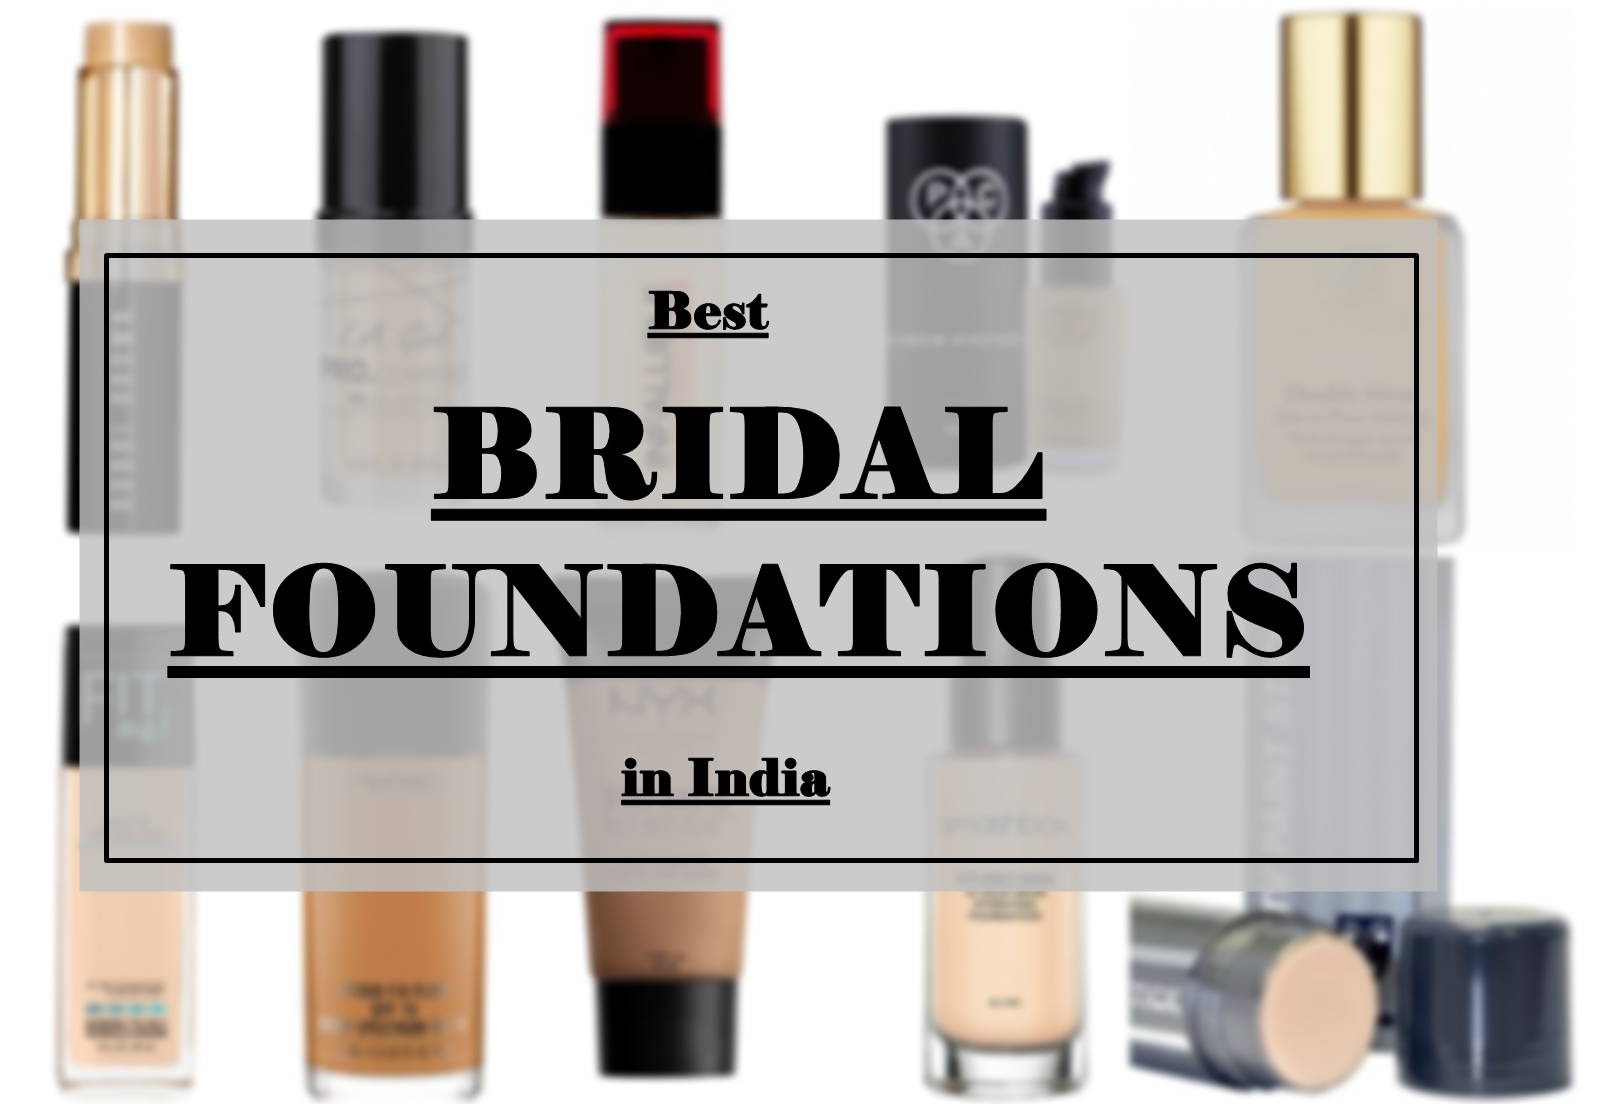 Best Bridal Foundations in India, Prices, Buy Online